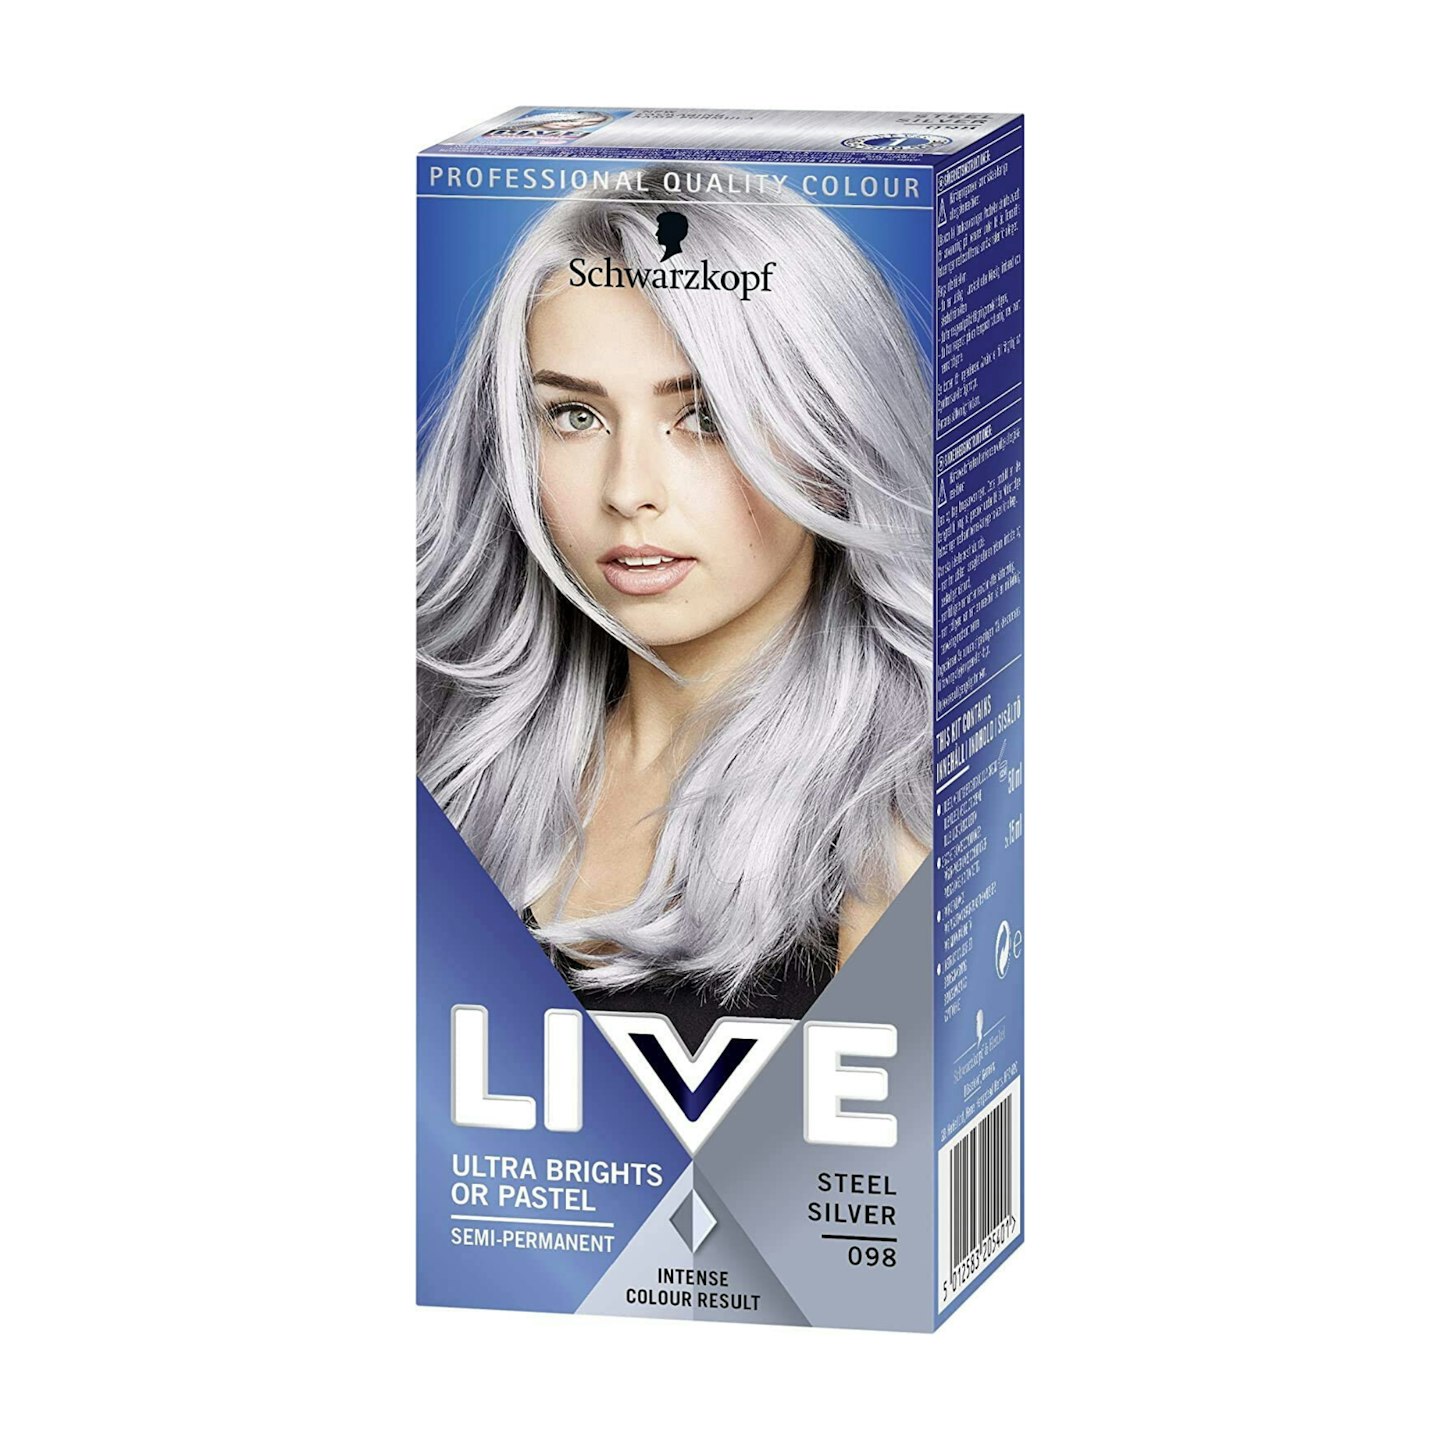 Schwarzkopf Live Ultra Bright or Pastel - Pack of 3